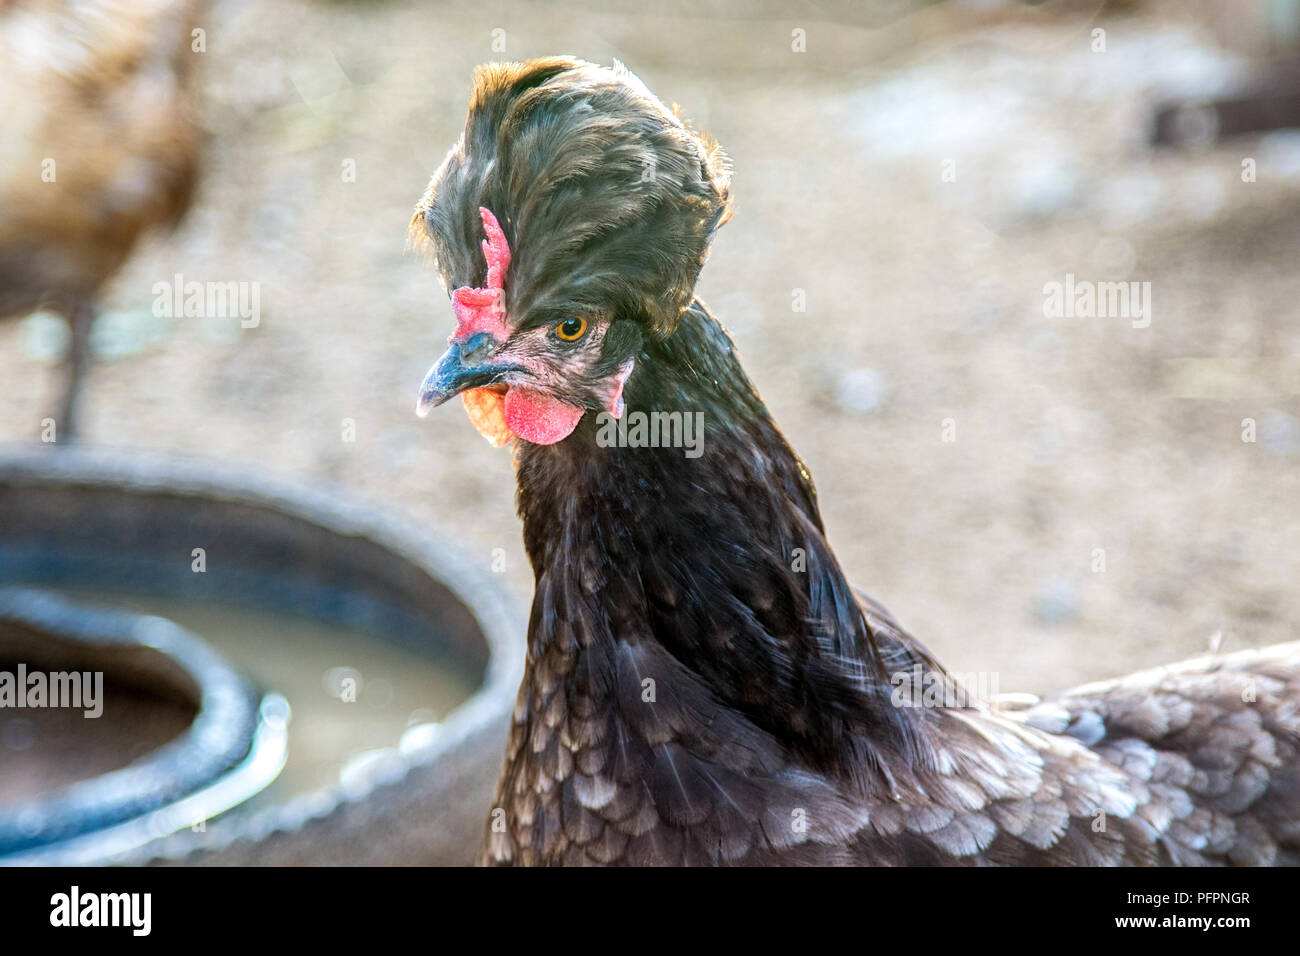 image of a bird portrait of a black crested hen on a farm Stock Photo